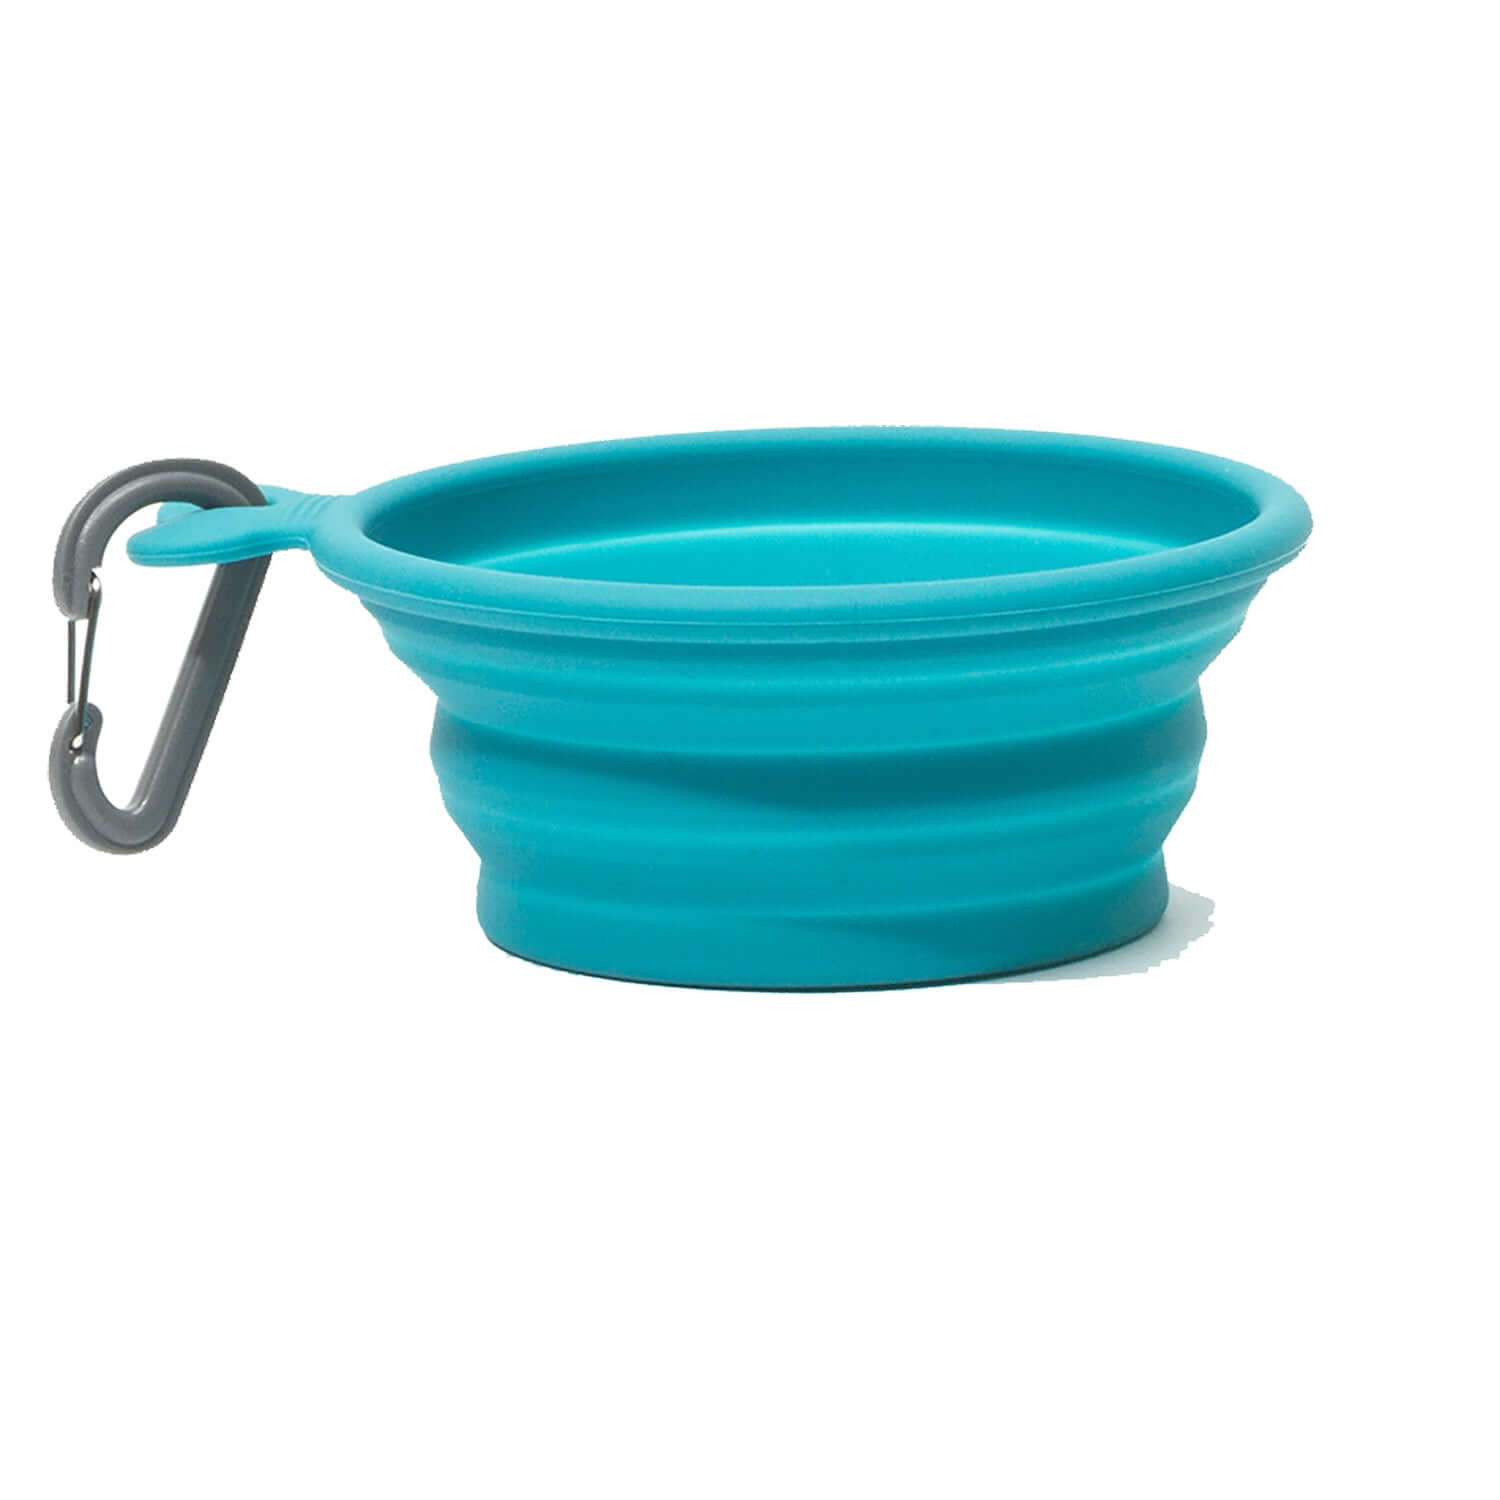 Blue Collapsible silicone pet travel bowl with carabiner 1.75 cup capacity